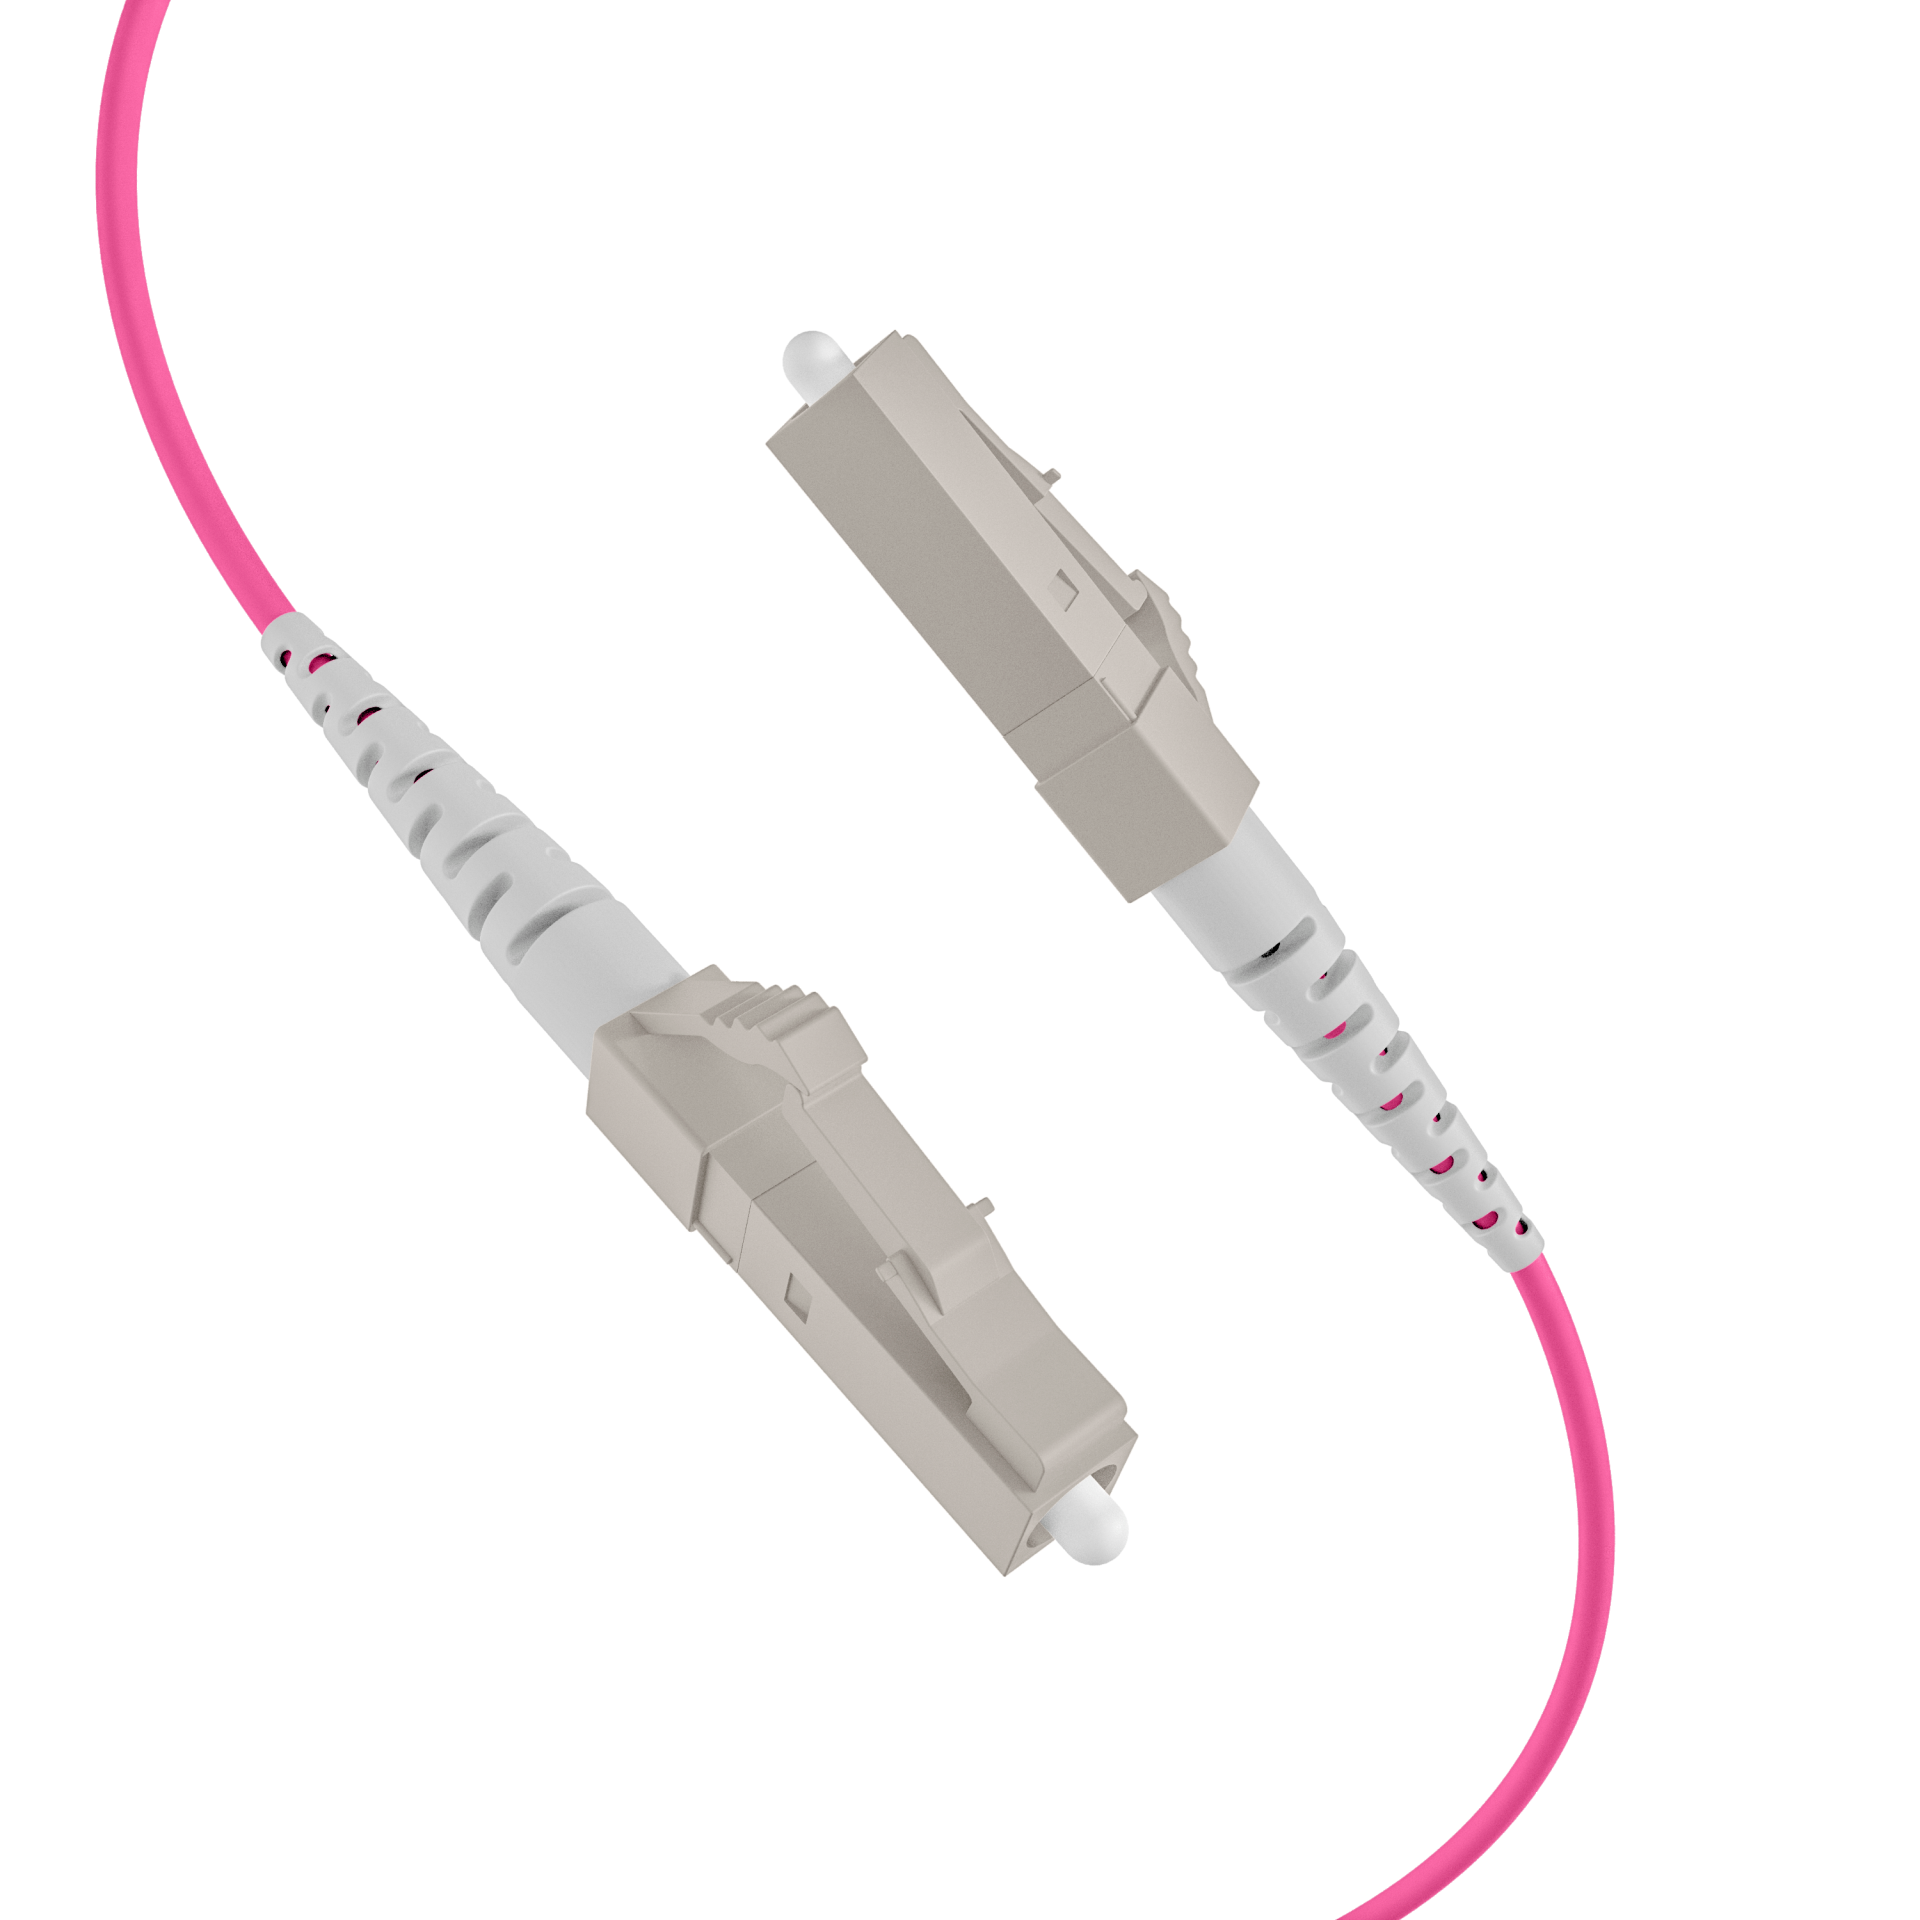 Trunkcable U-DQ(ZN)BH OM4 8G (1x8) LC-LC,80m Dca LSZH